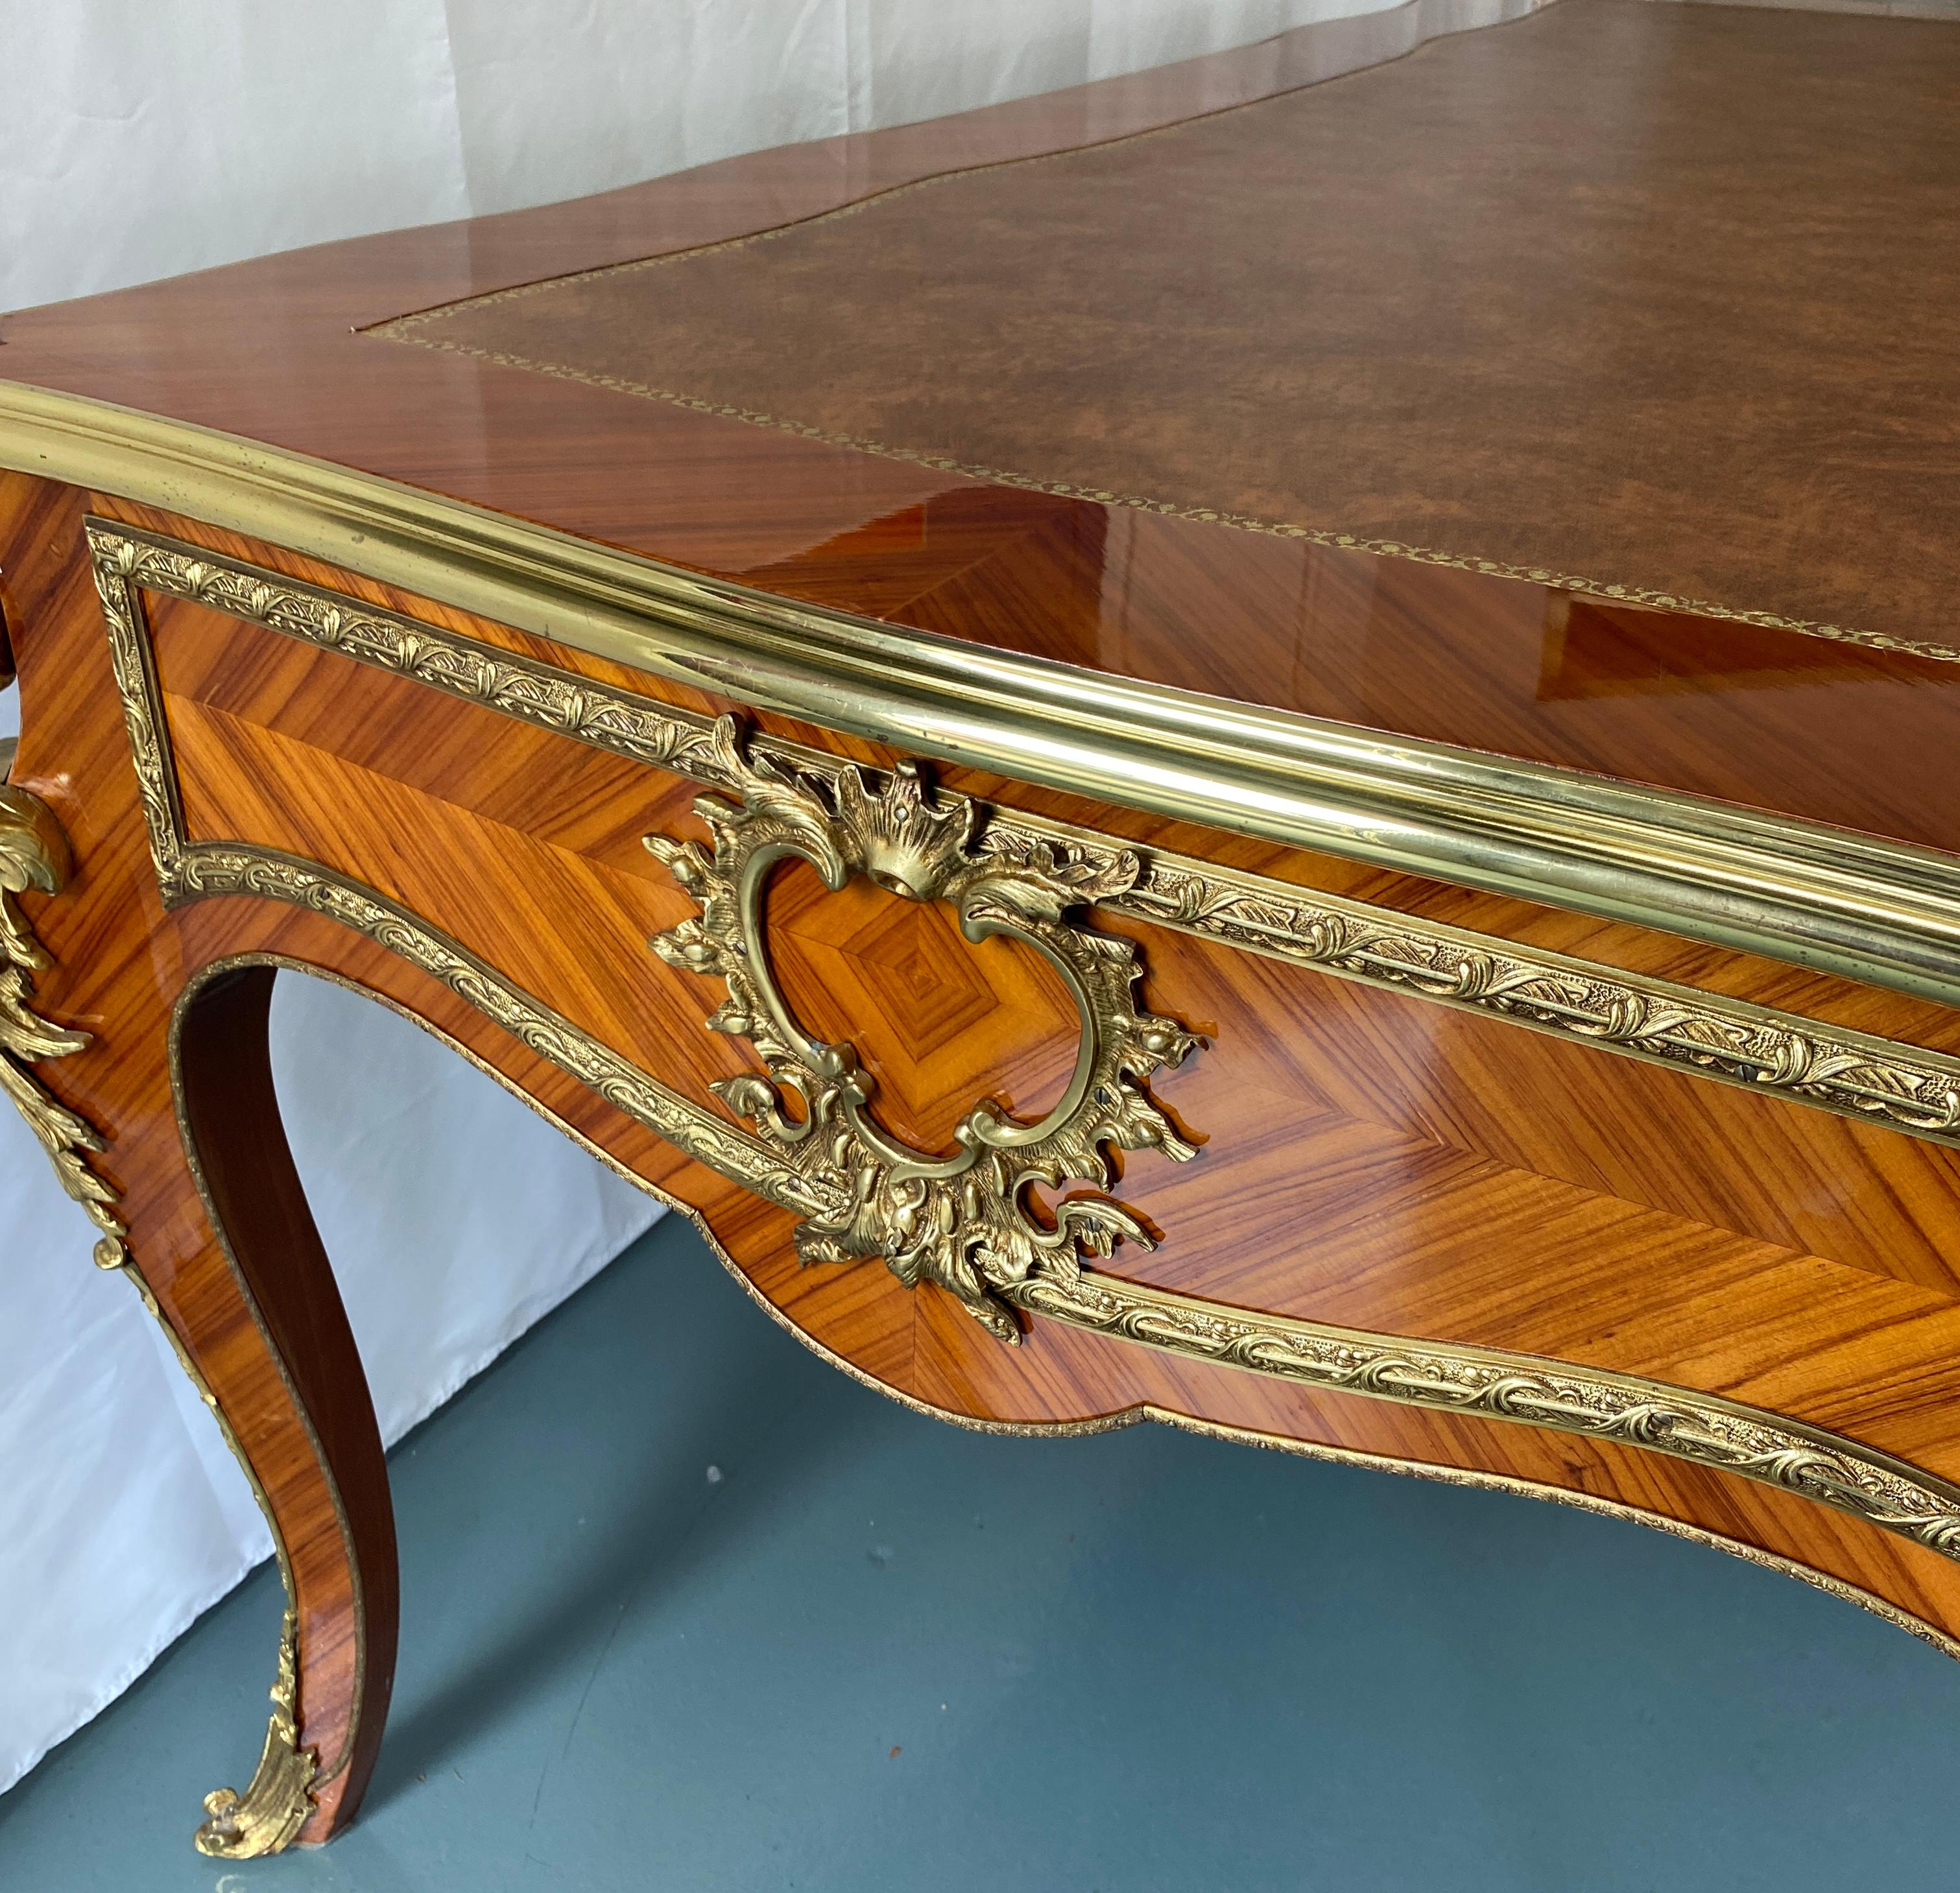 Varnished French Louis XV Style Bureau Plat with Ormolu Mounts French Flat Desk For Sale